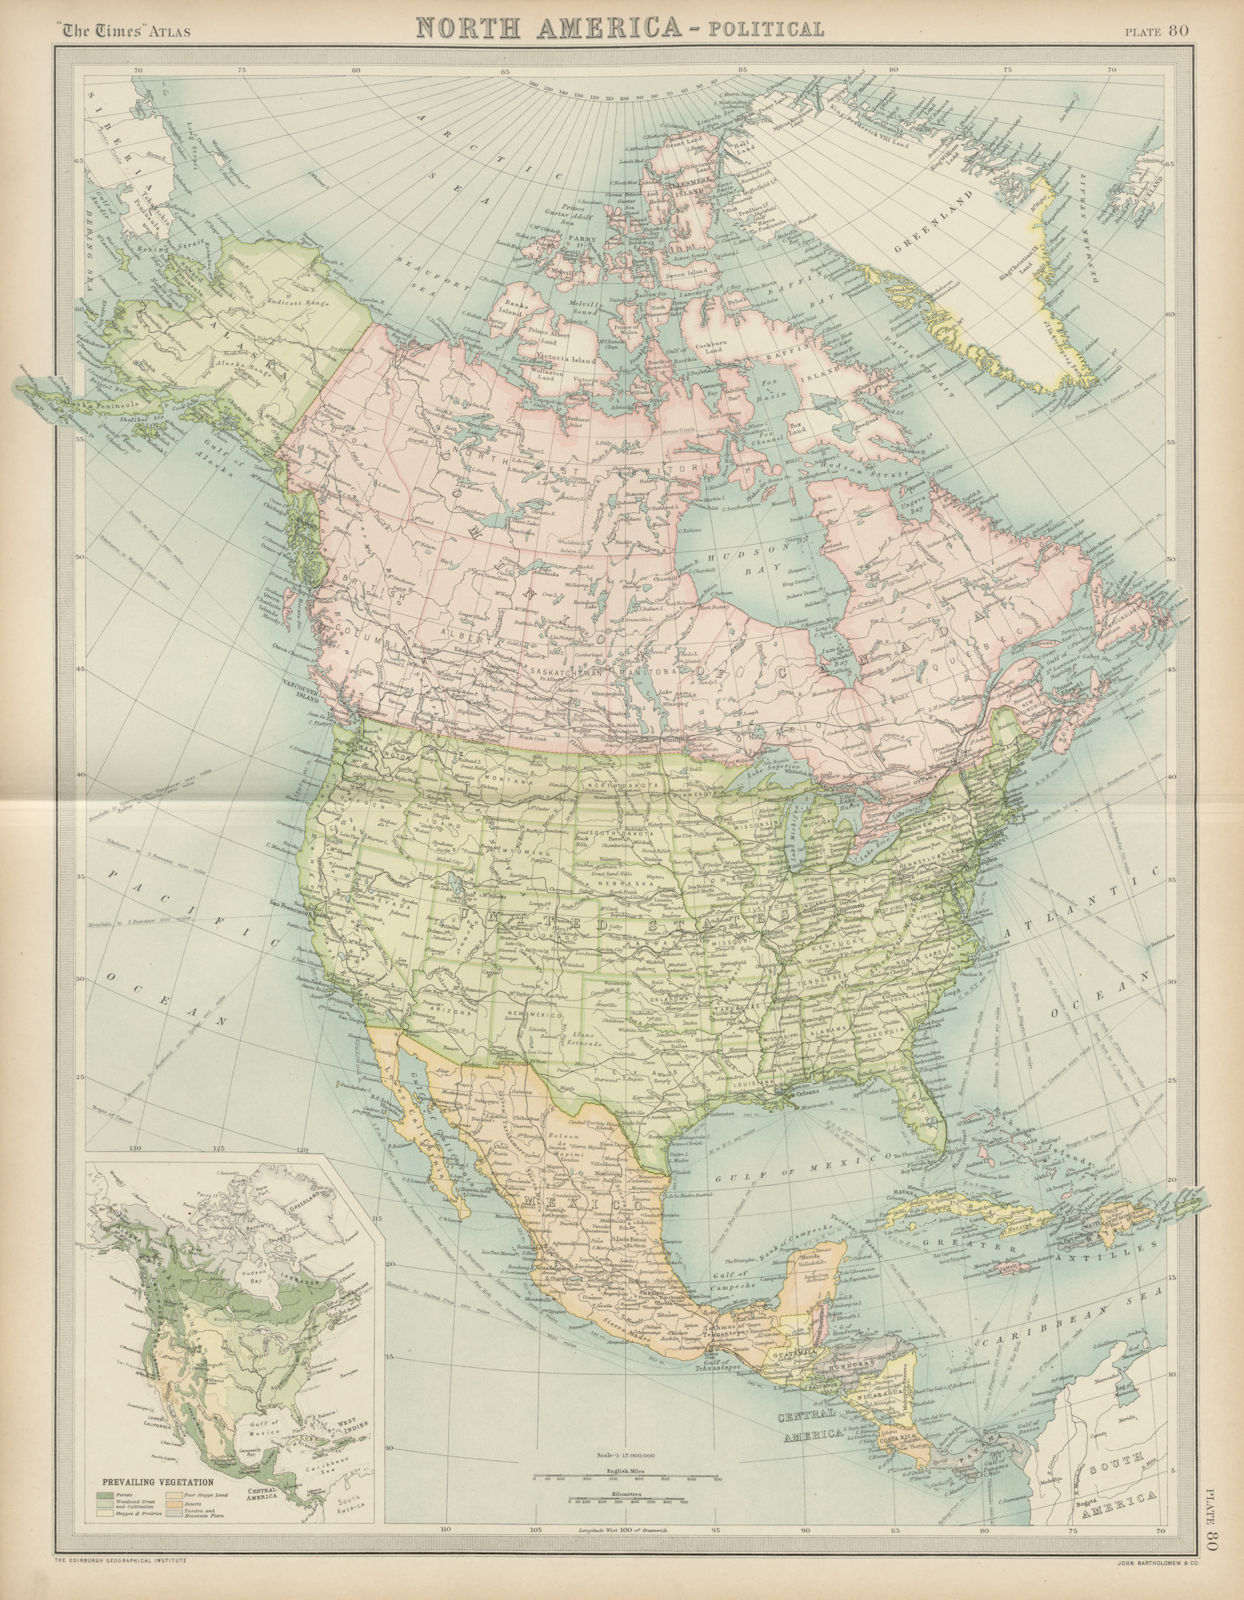 Associate Product North America - Political. United States Canada Mexico Greenland. TIMES 1922 map